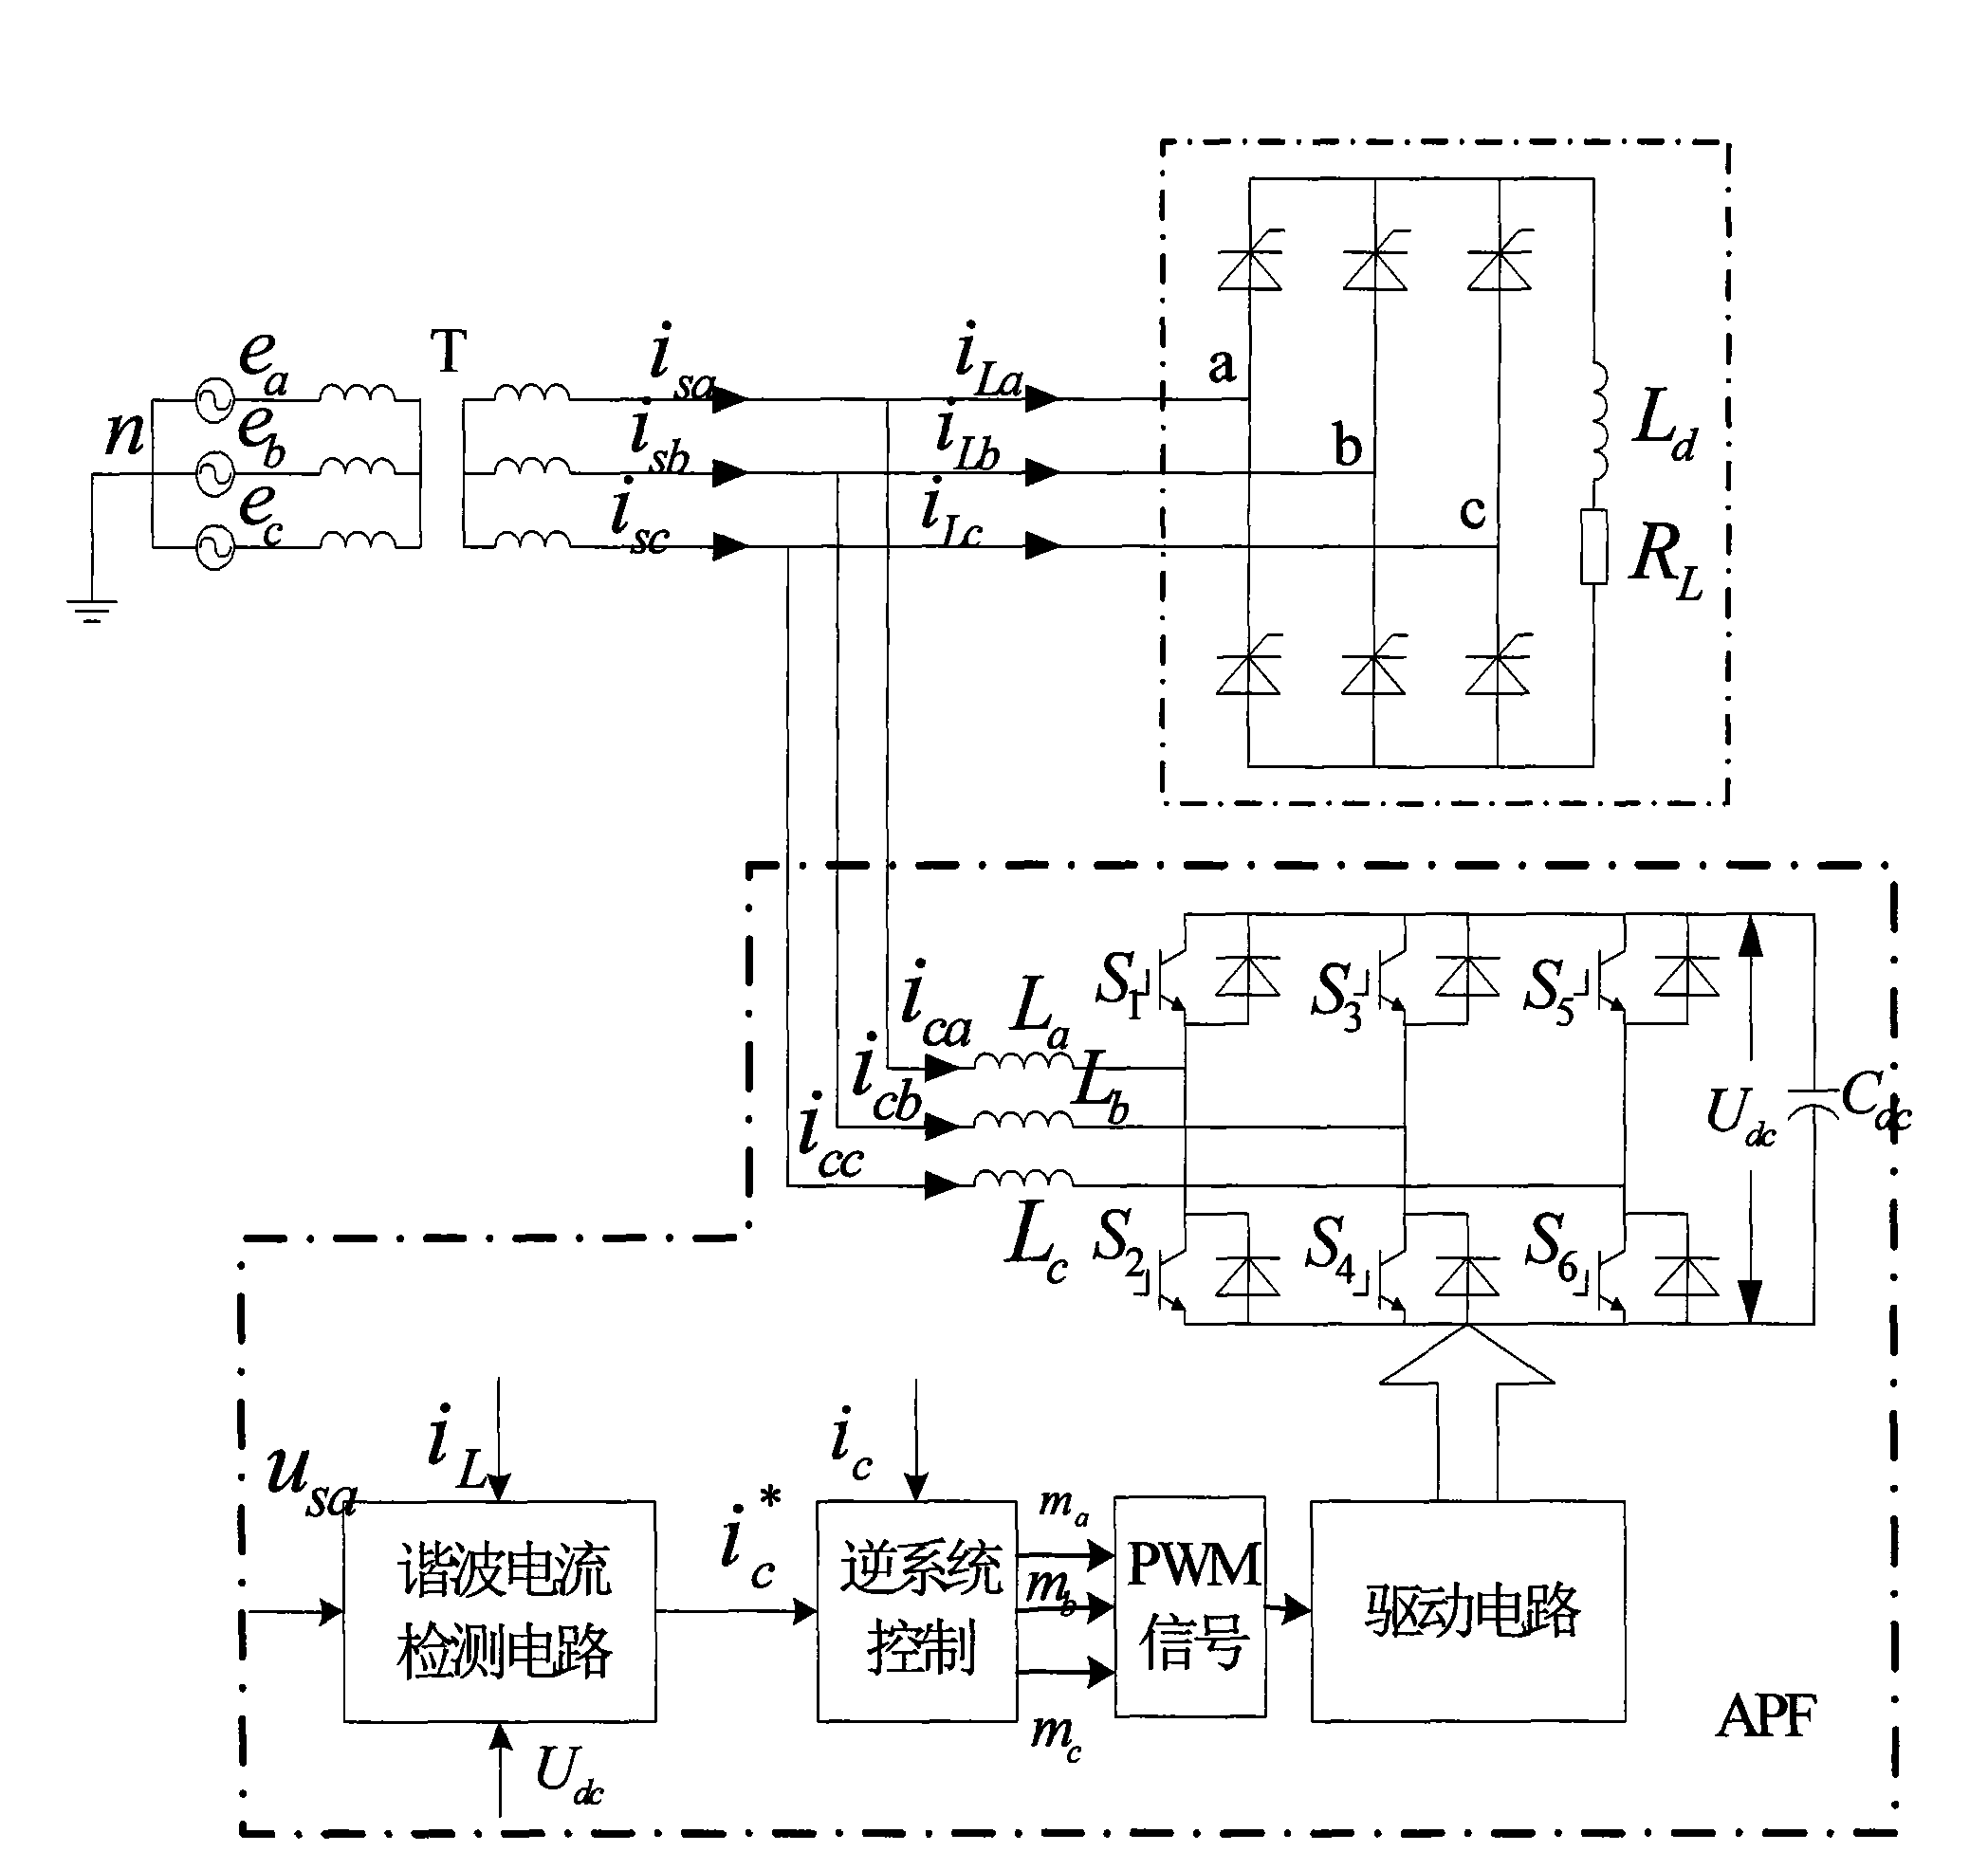 Implementation method of inverse system controller of active power filter